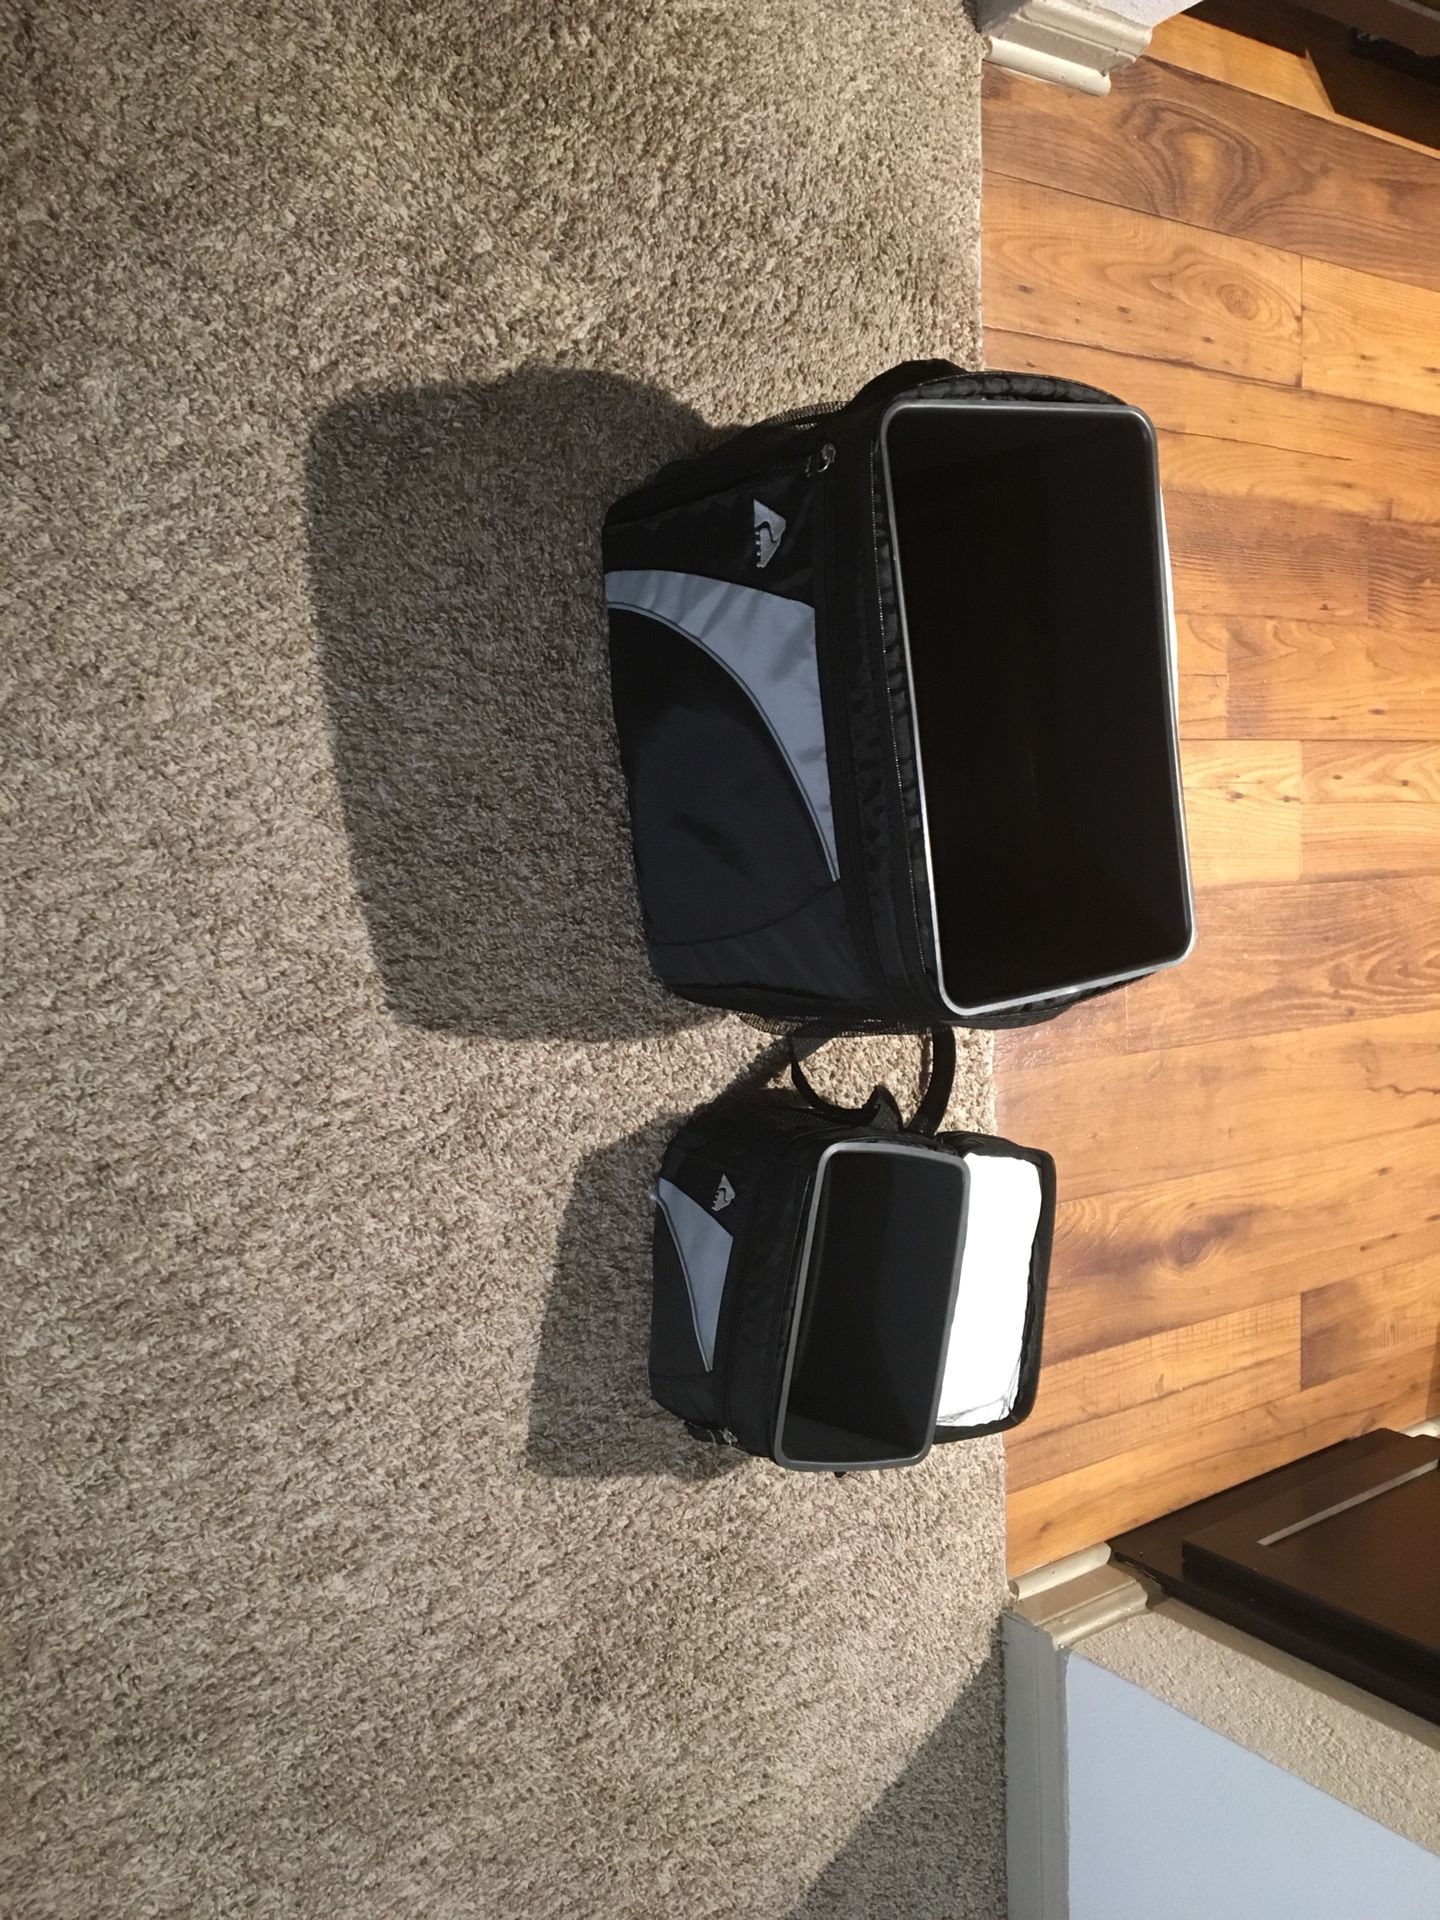 Large and small coolers/lunchboxes